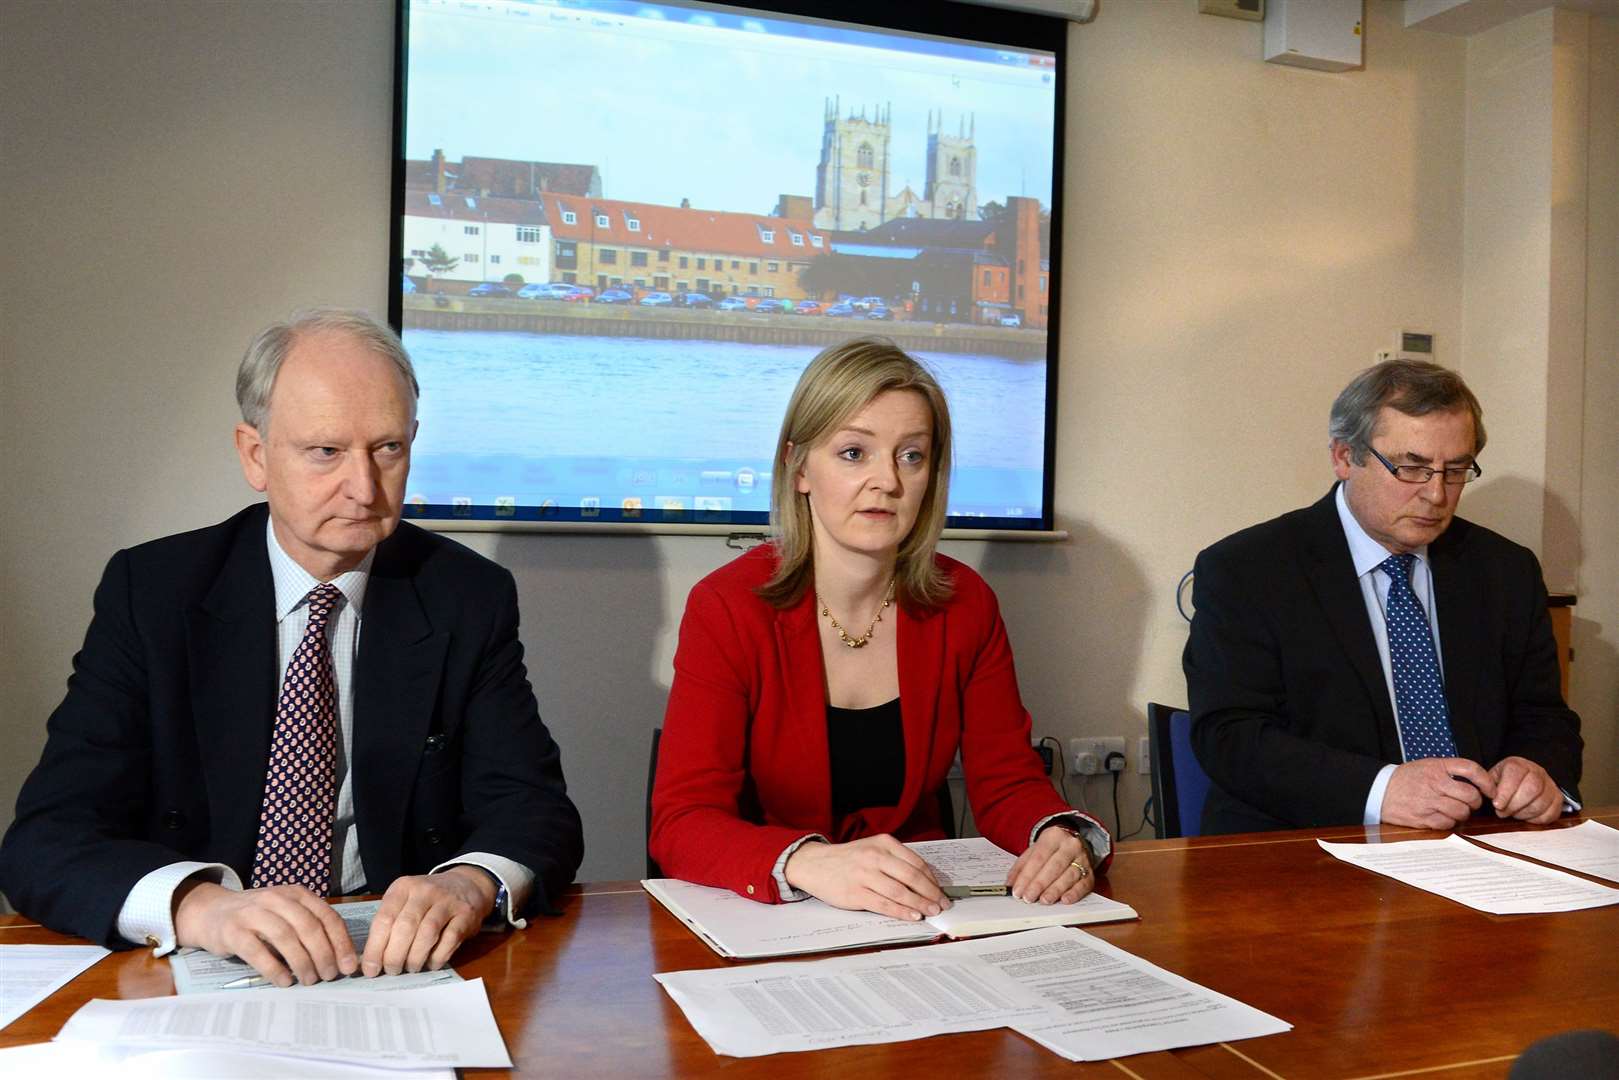 Incinerator costings press conference held by then-North West Norfolk MP Sir Henry Bellingham, Liz Truss MP and Nick Daubney, who was the Leader of the Council in 2014